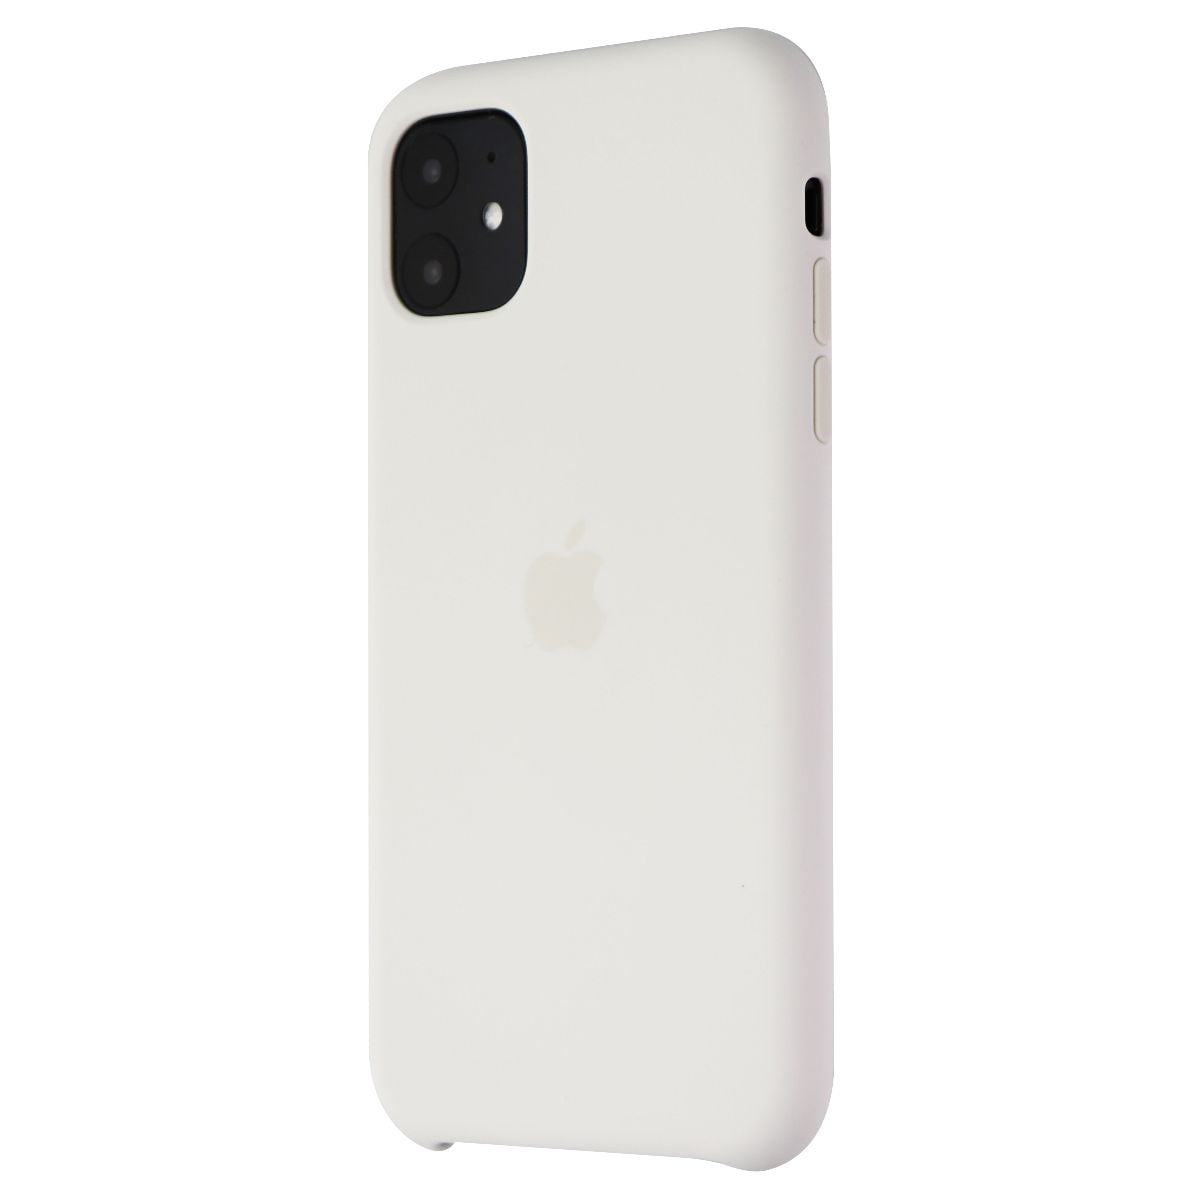 Apple Silicone Case for iPhone 11 Smartphones - White (MWVX2ZM/A